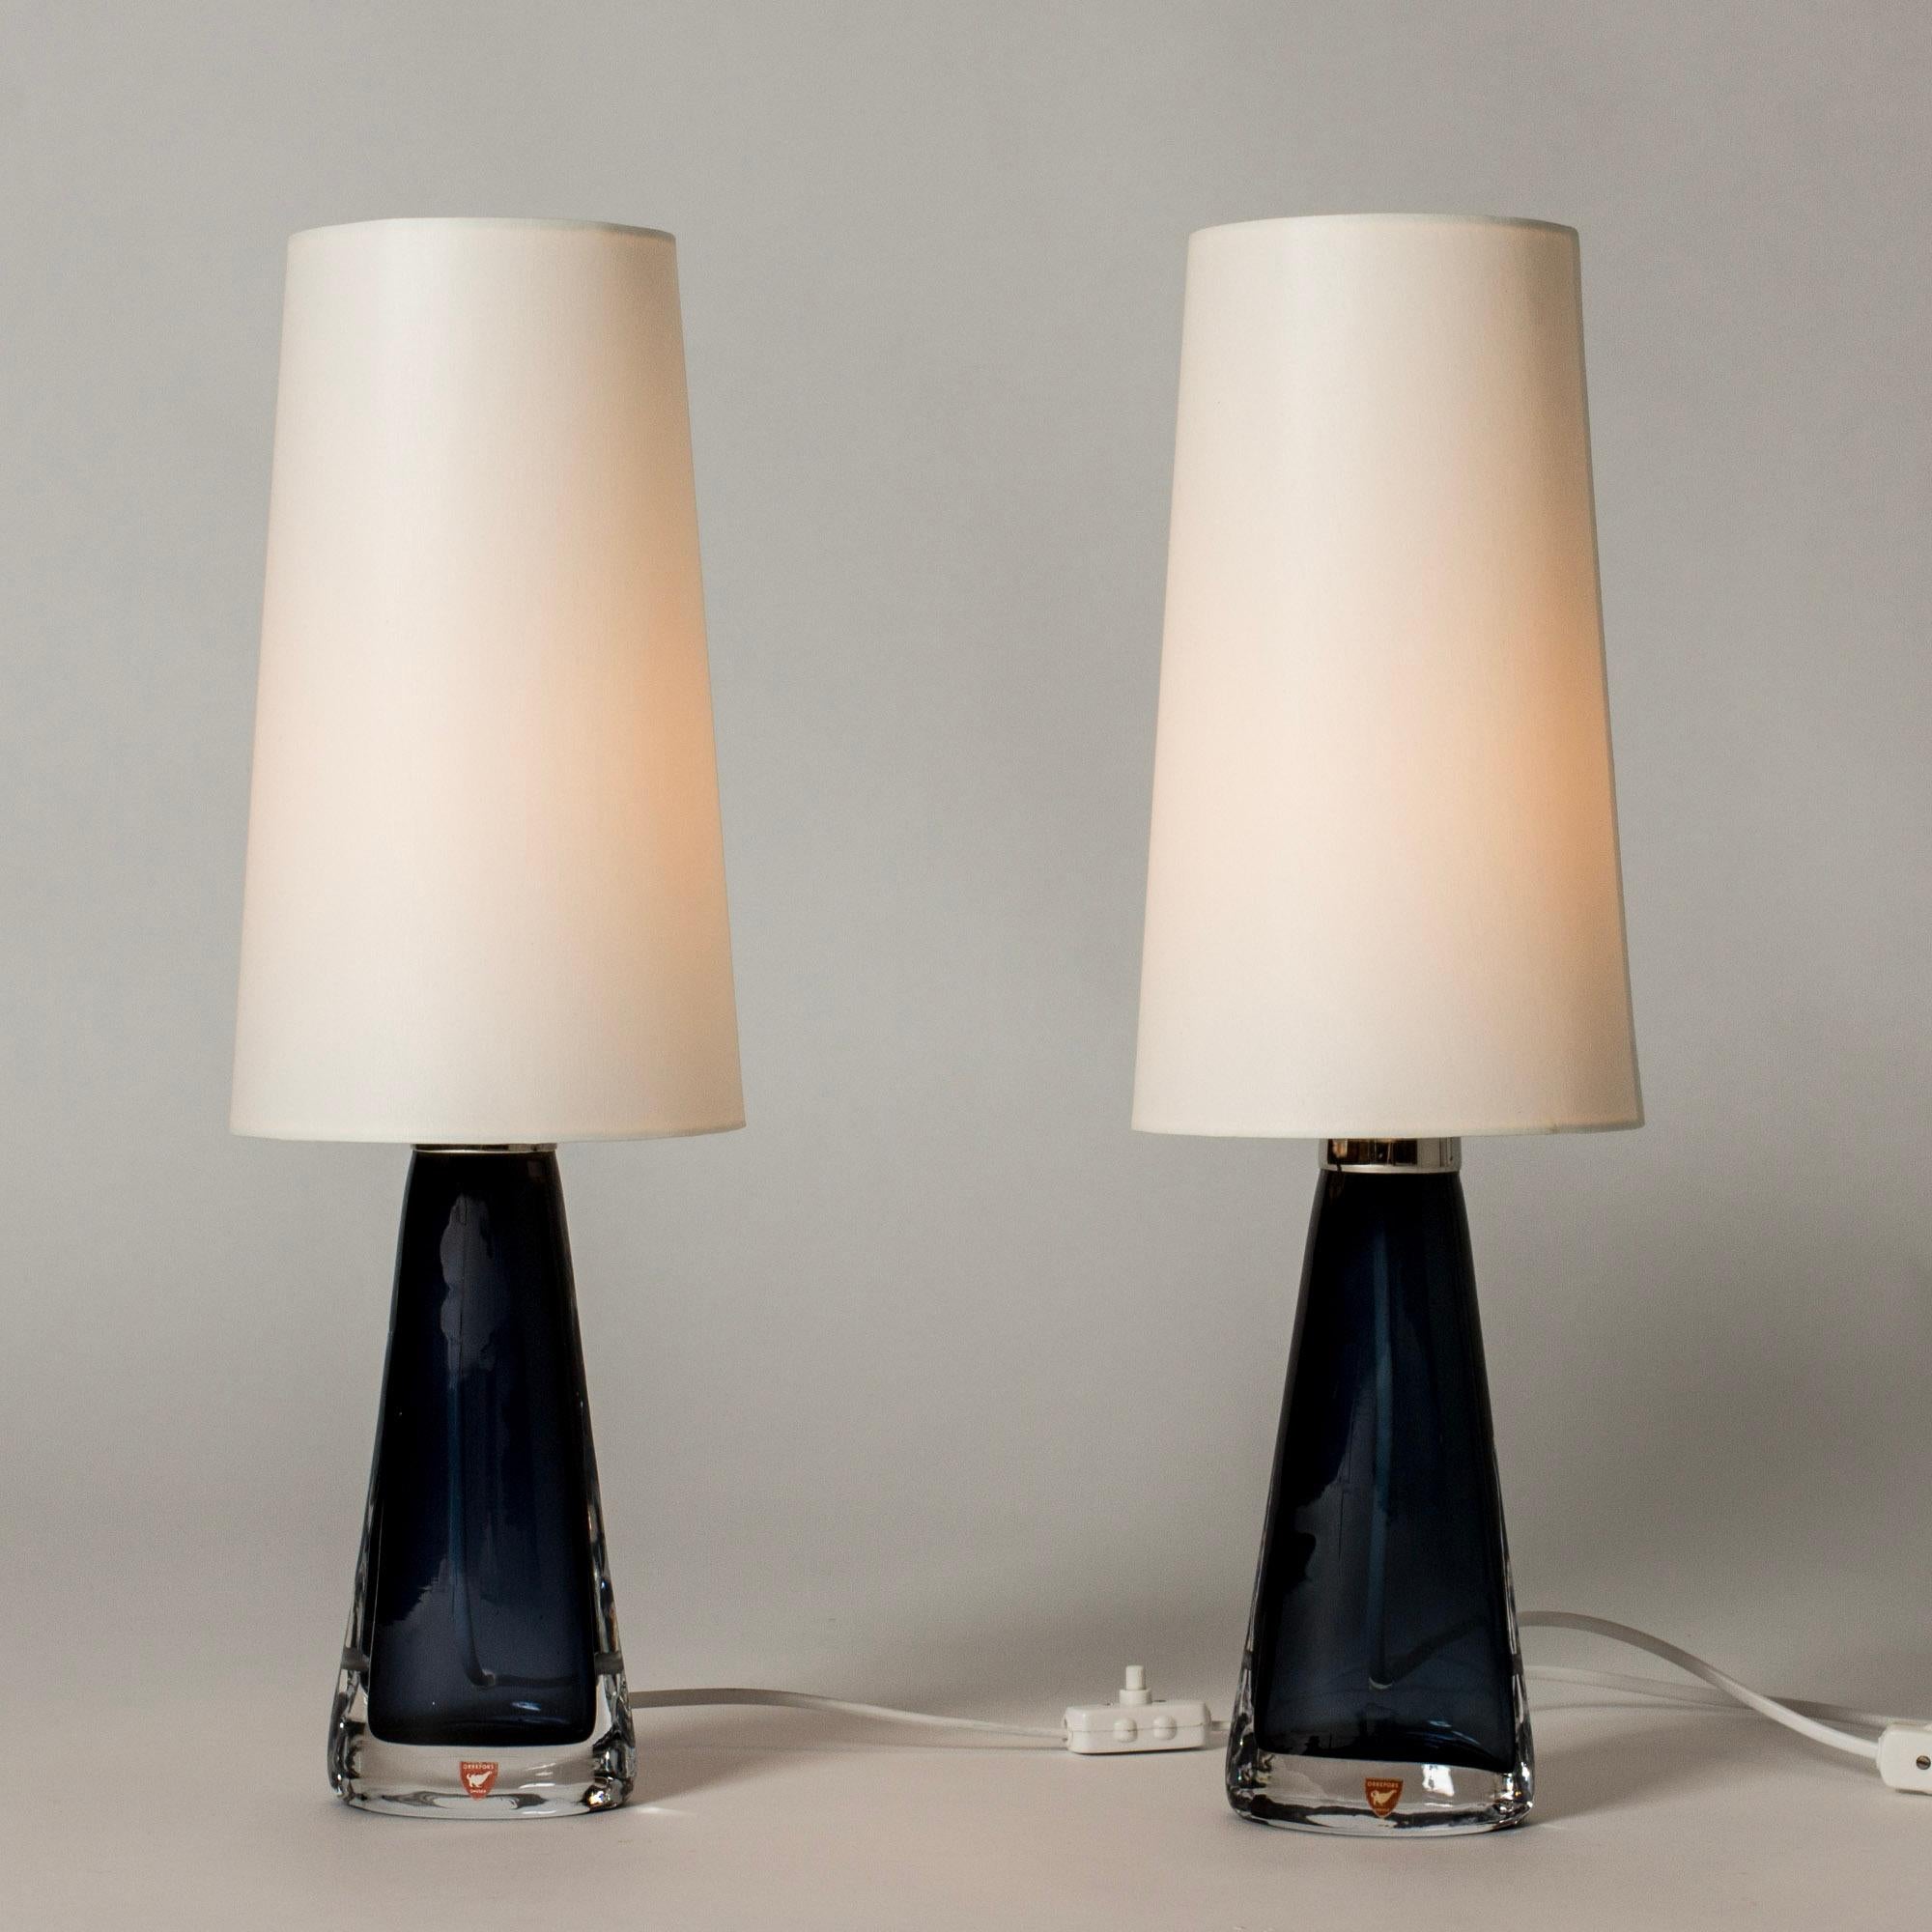 Pair of crystal glass table lamps by Carl Fagerlund in a neat size. Made in dark blue glass in a narrow conical shape, almond shaped at the base. Beautiful translucent color, elegant design.